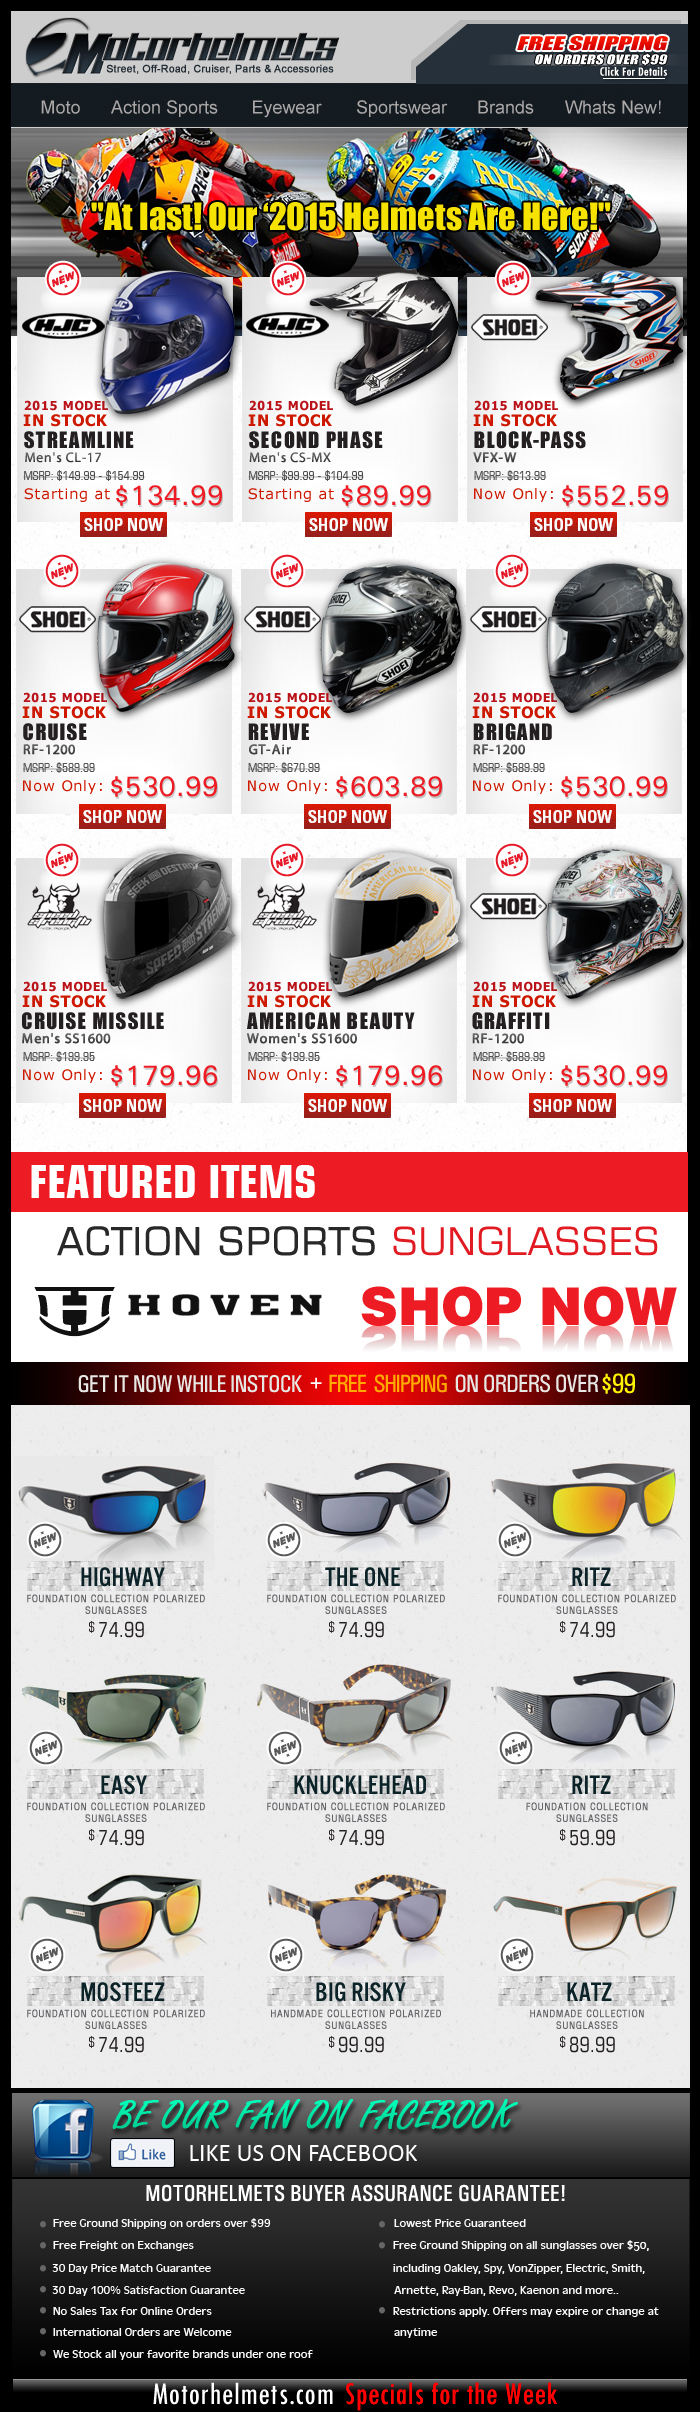 Shop our 2015 Helmet Collection: HJC | Shoei | Speed & Strength